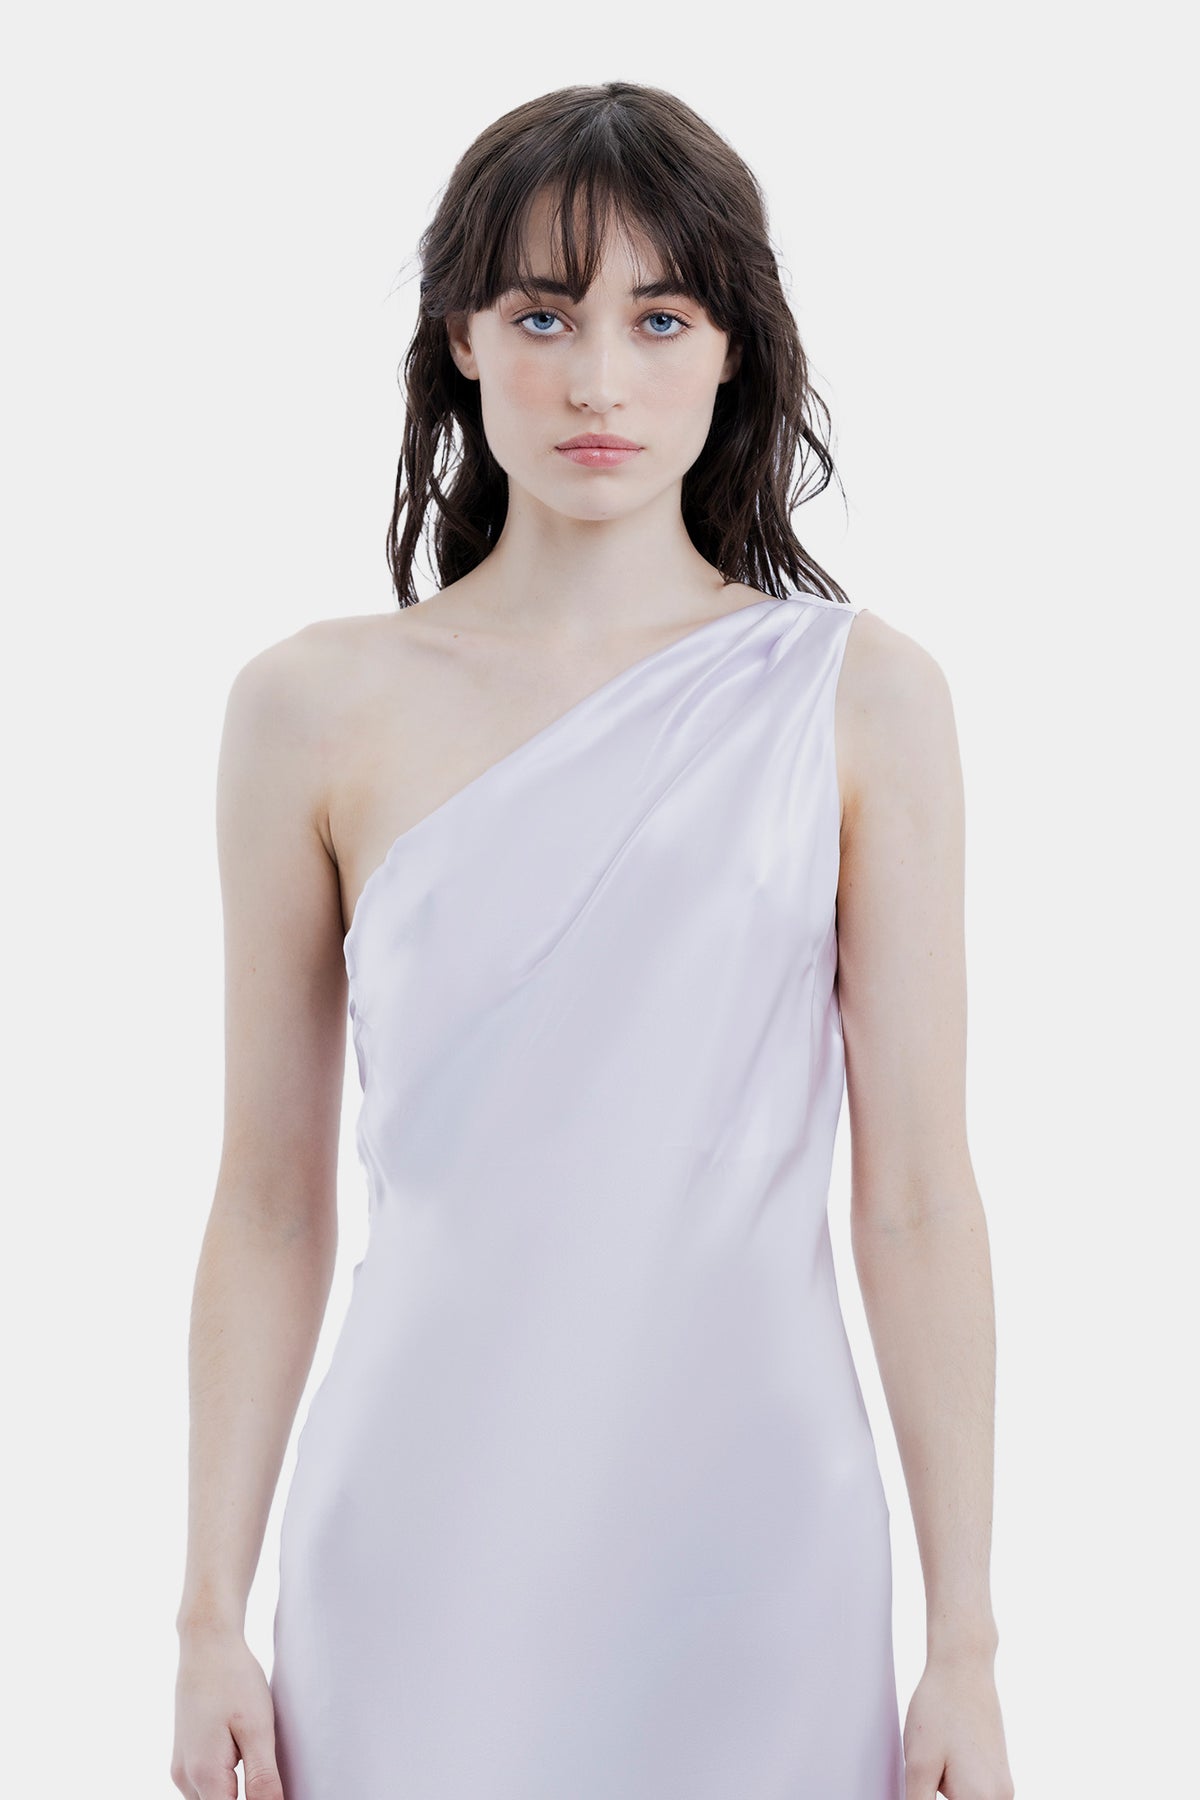 The Asym Cowl Maxi Dress By GINIA In Lilac Ash